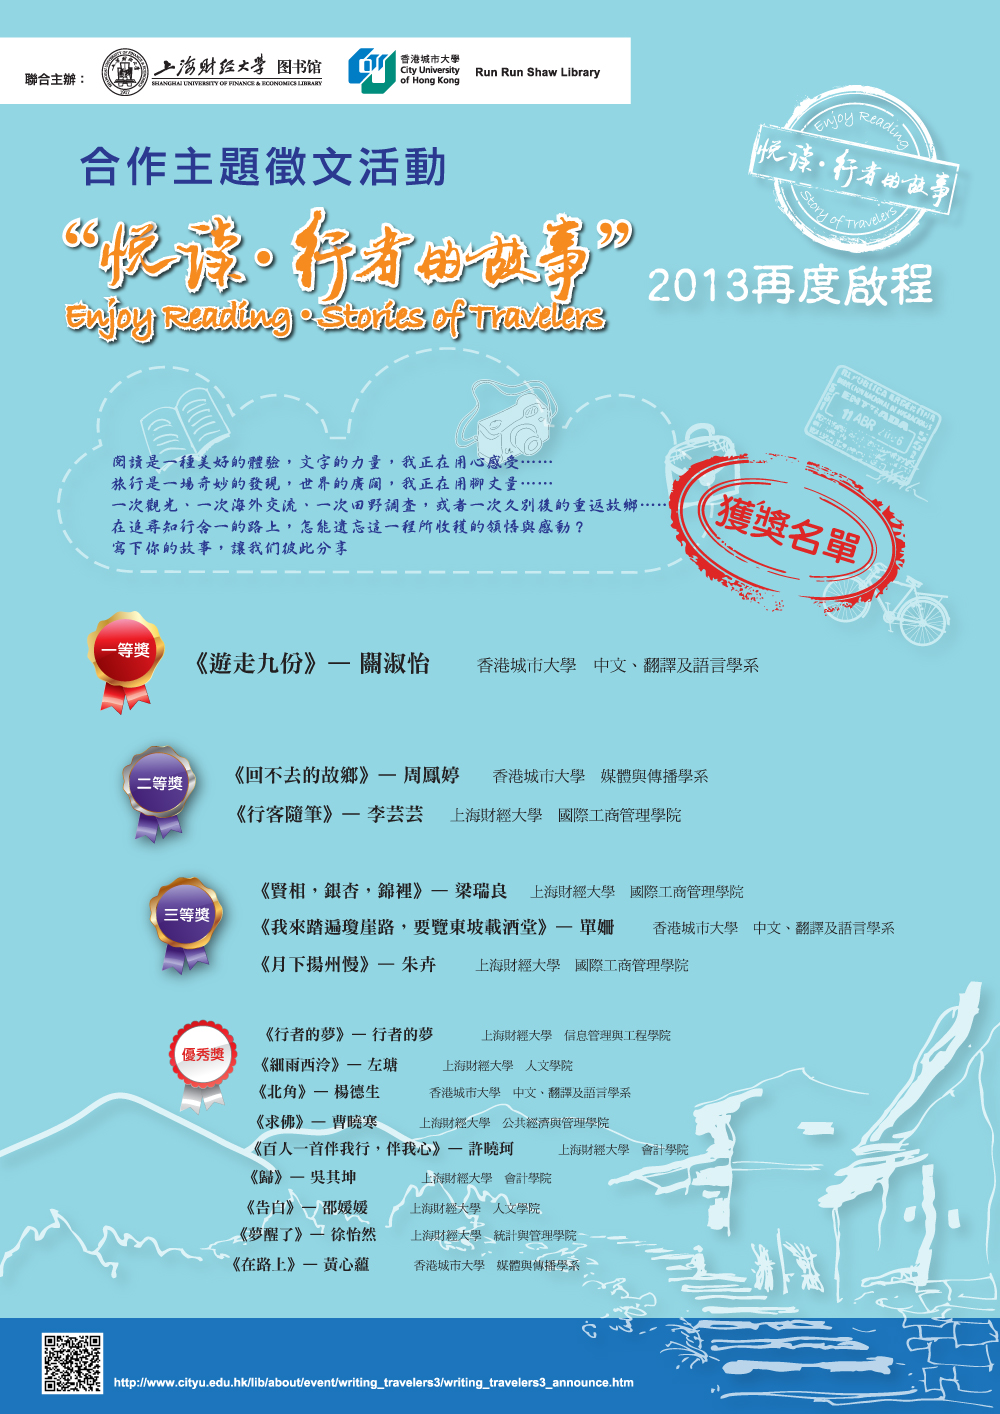 Winner List of the 3rd "Enjoy Reading • Stories of Travelers" Writing Competition 「悅讀 • 行者的故事」第三期徵文比賽獲獎名單